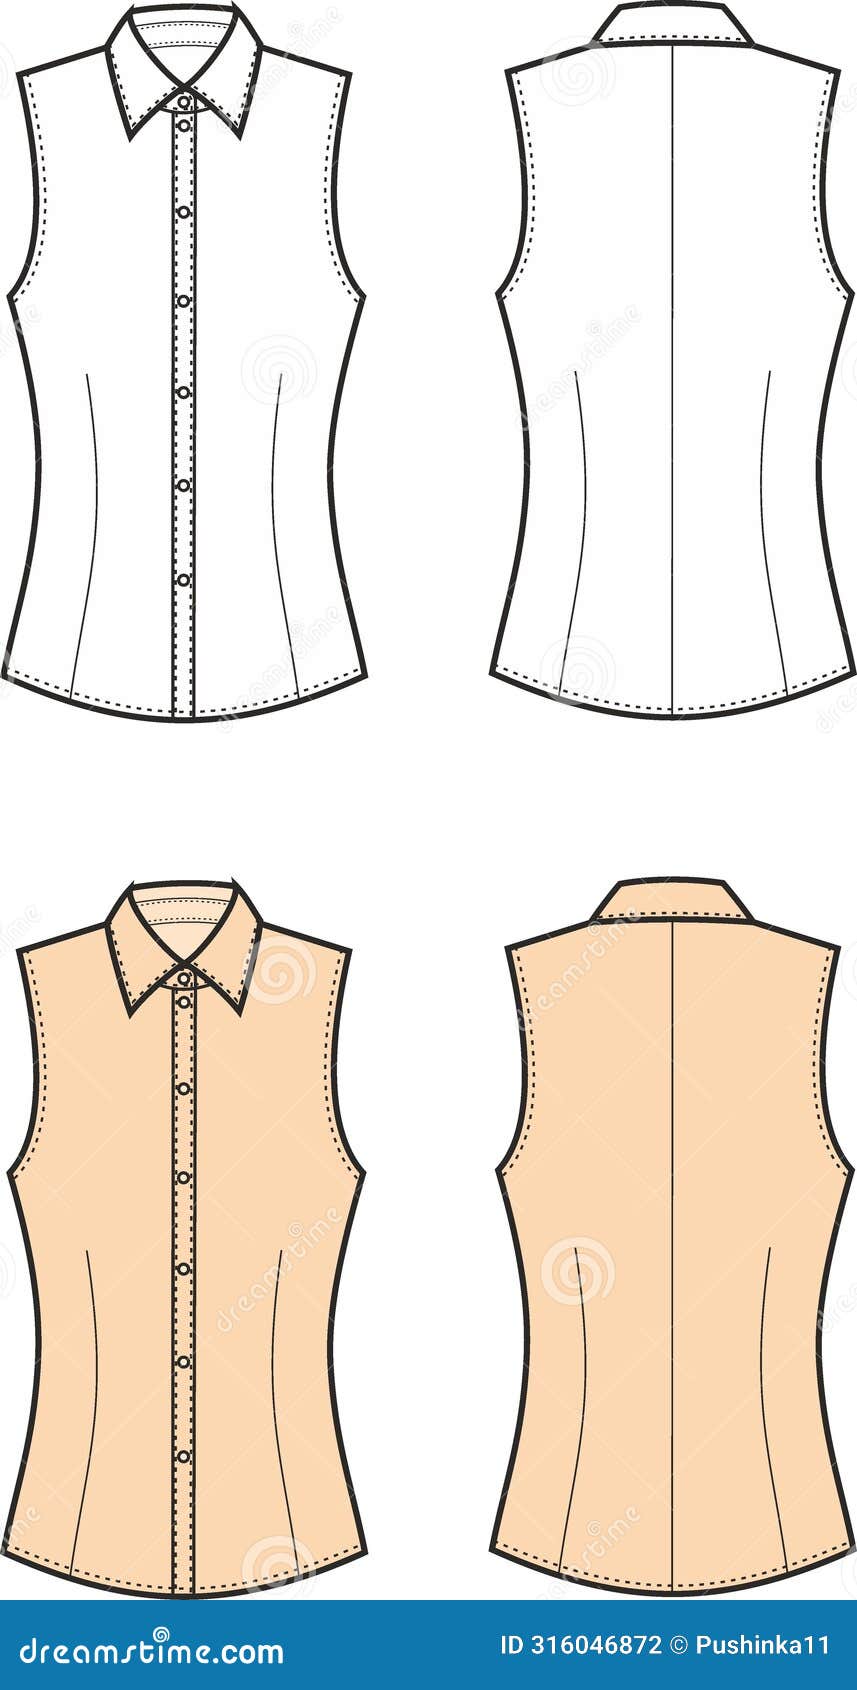 sleeveless shirt flat sketch. classic blouse apparel . front back.